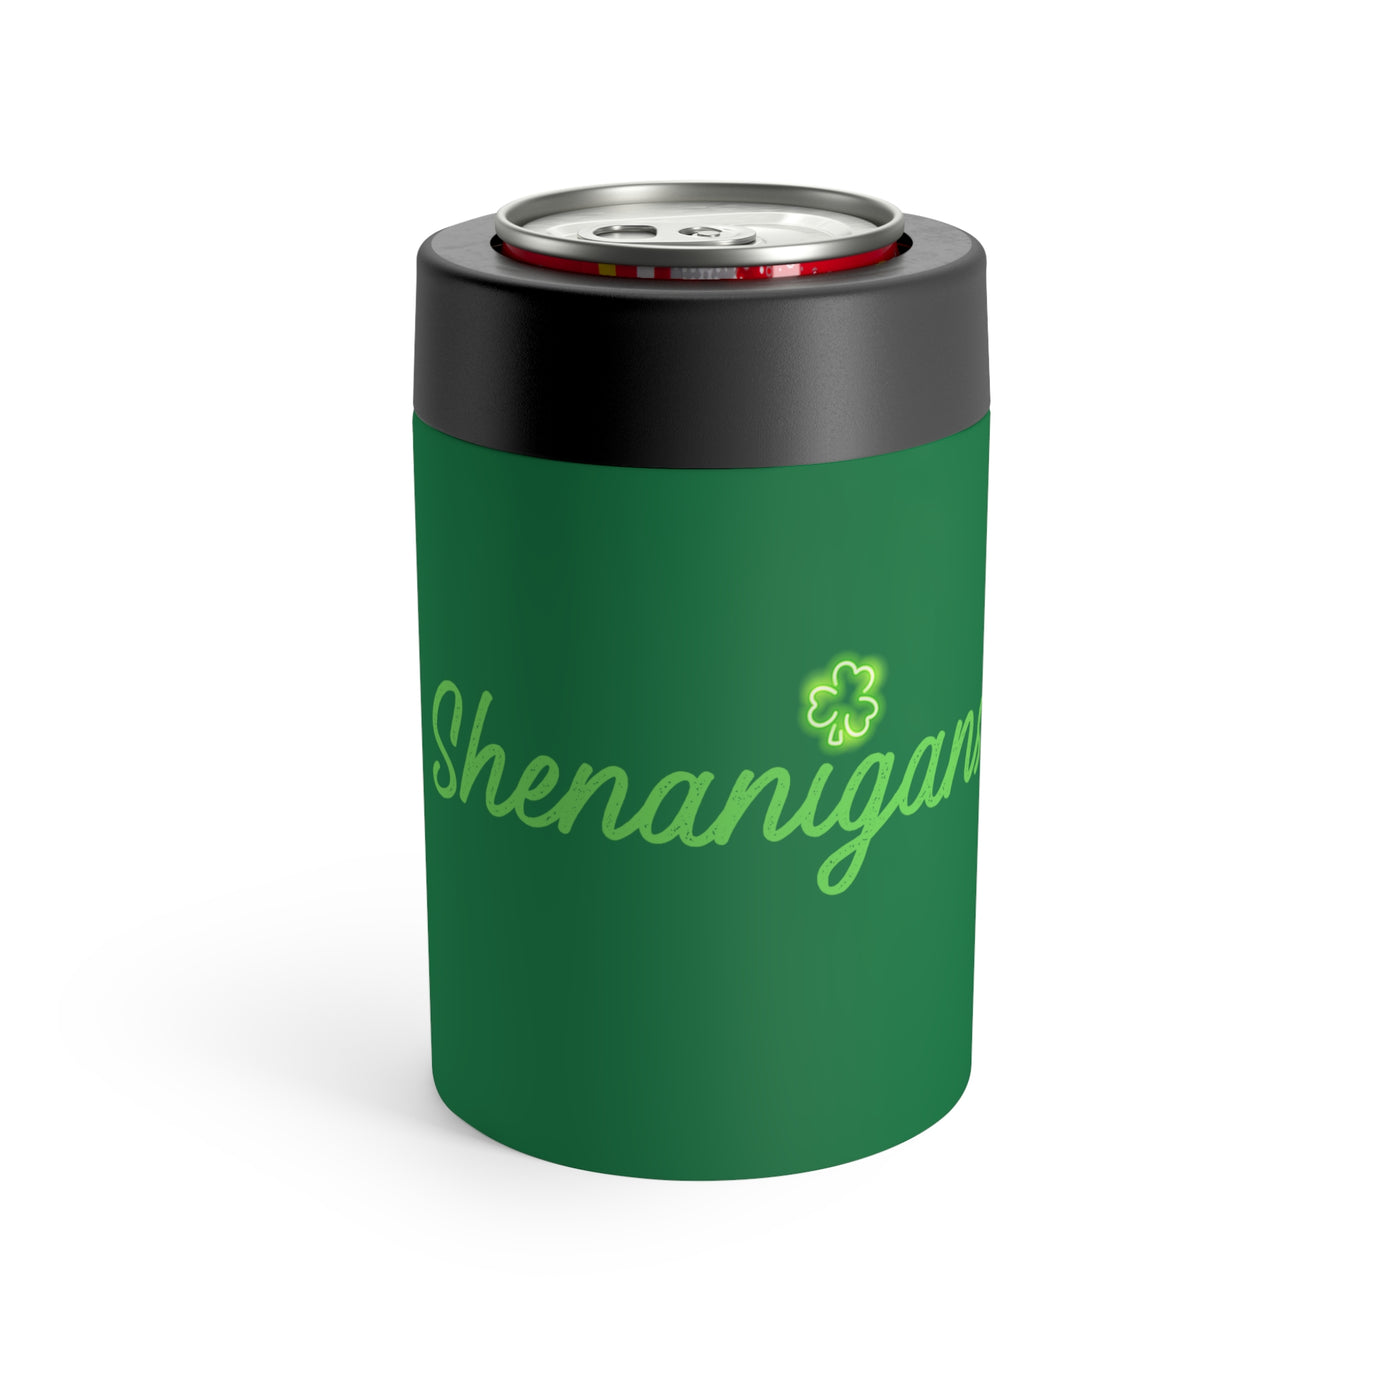 Shenanigans Stainless Steel Can Holder